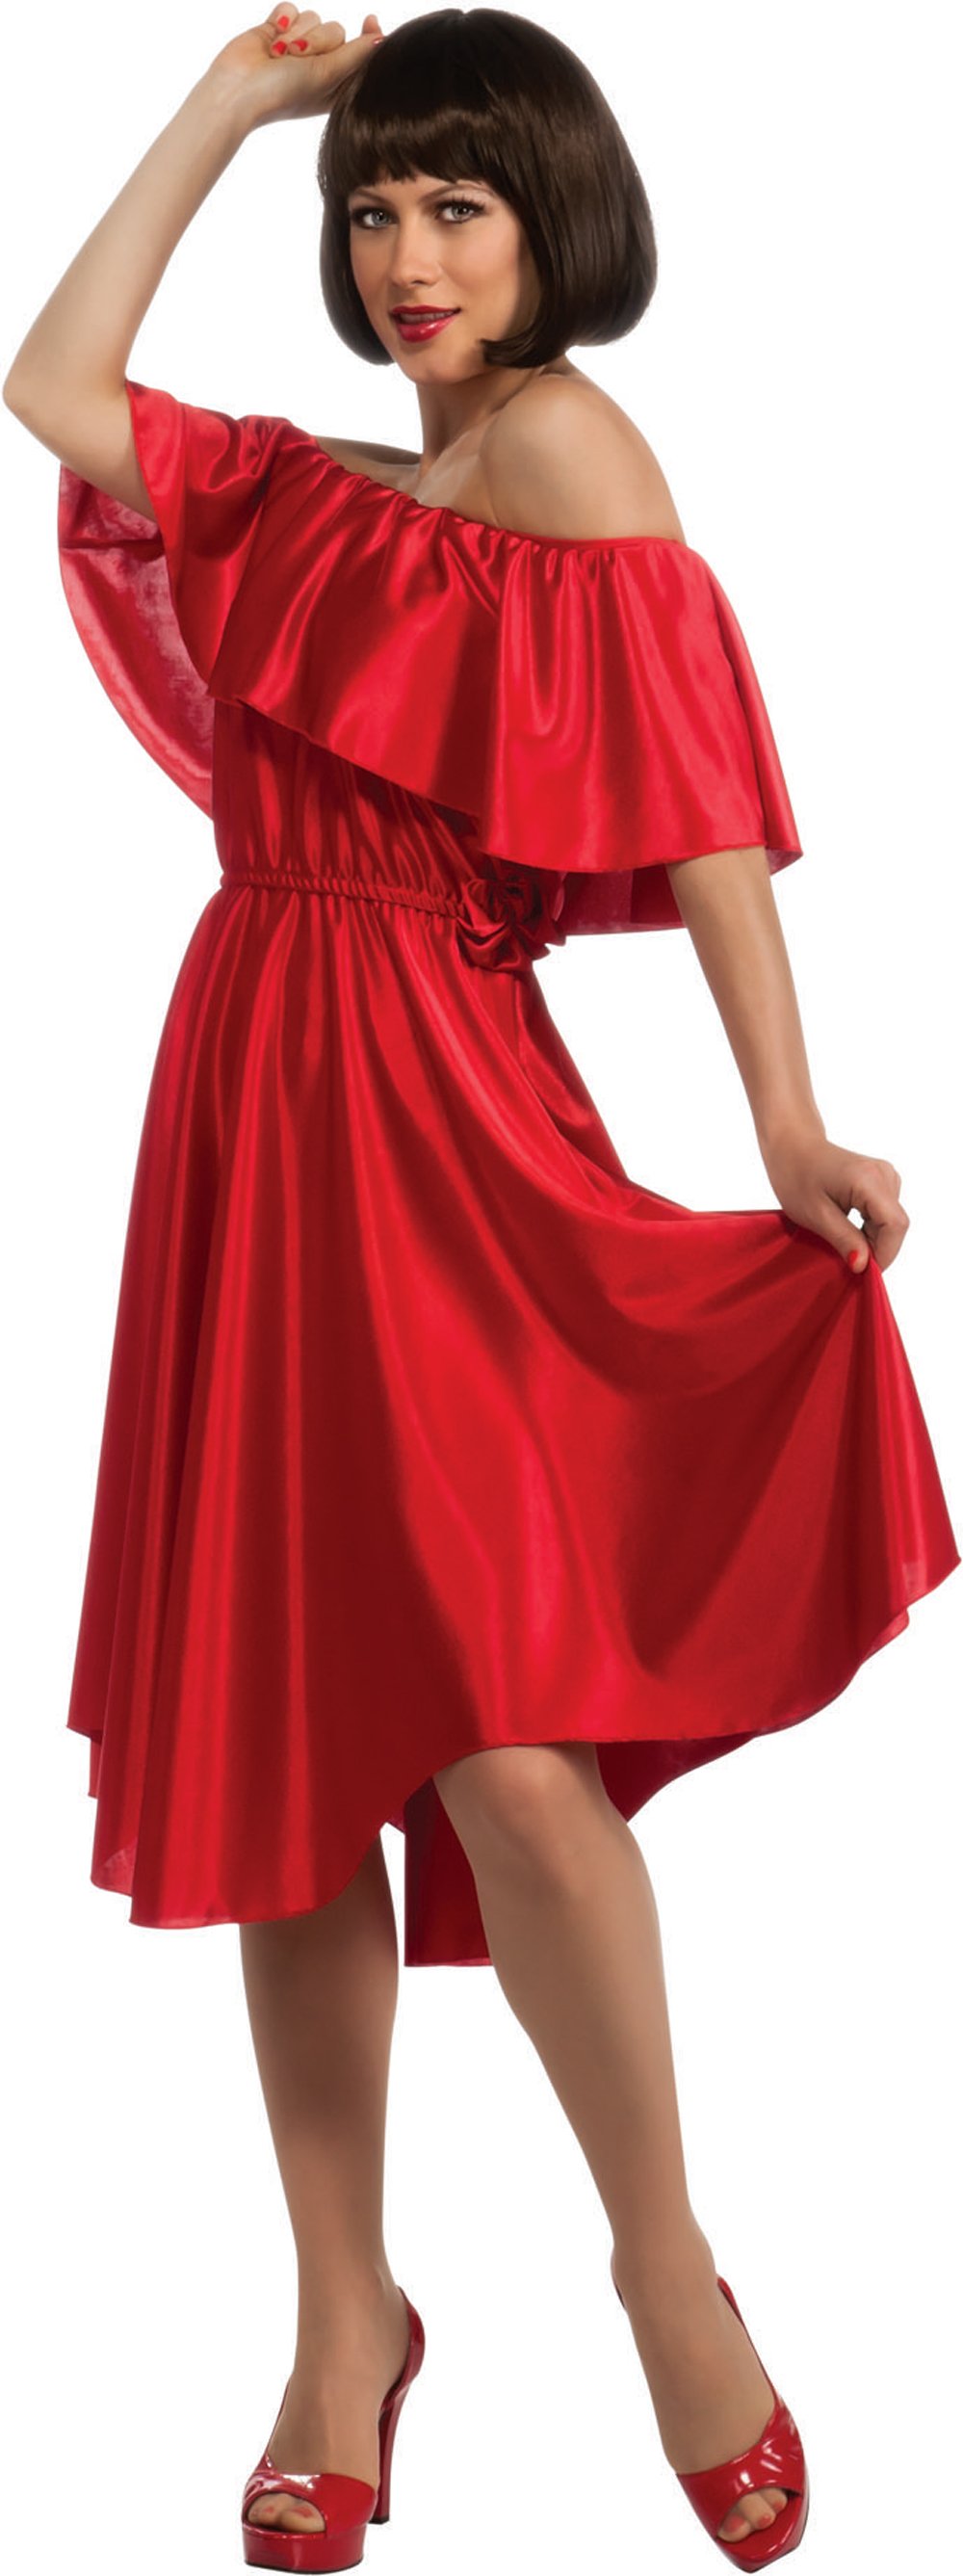 Saturday Night Fever Red Dress Adult Costume - Click Image to Close